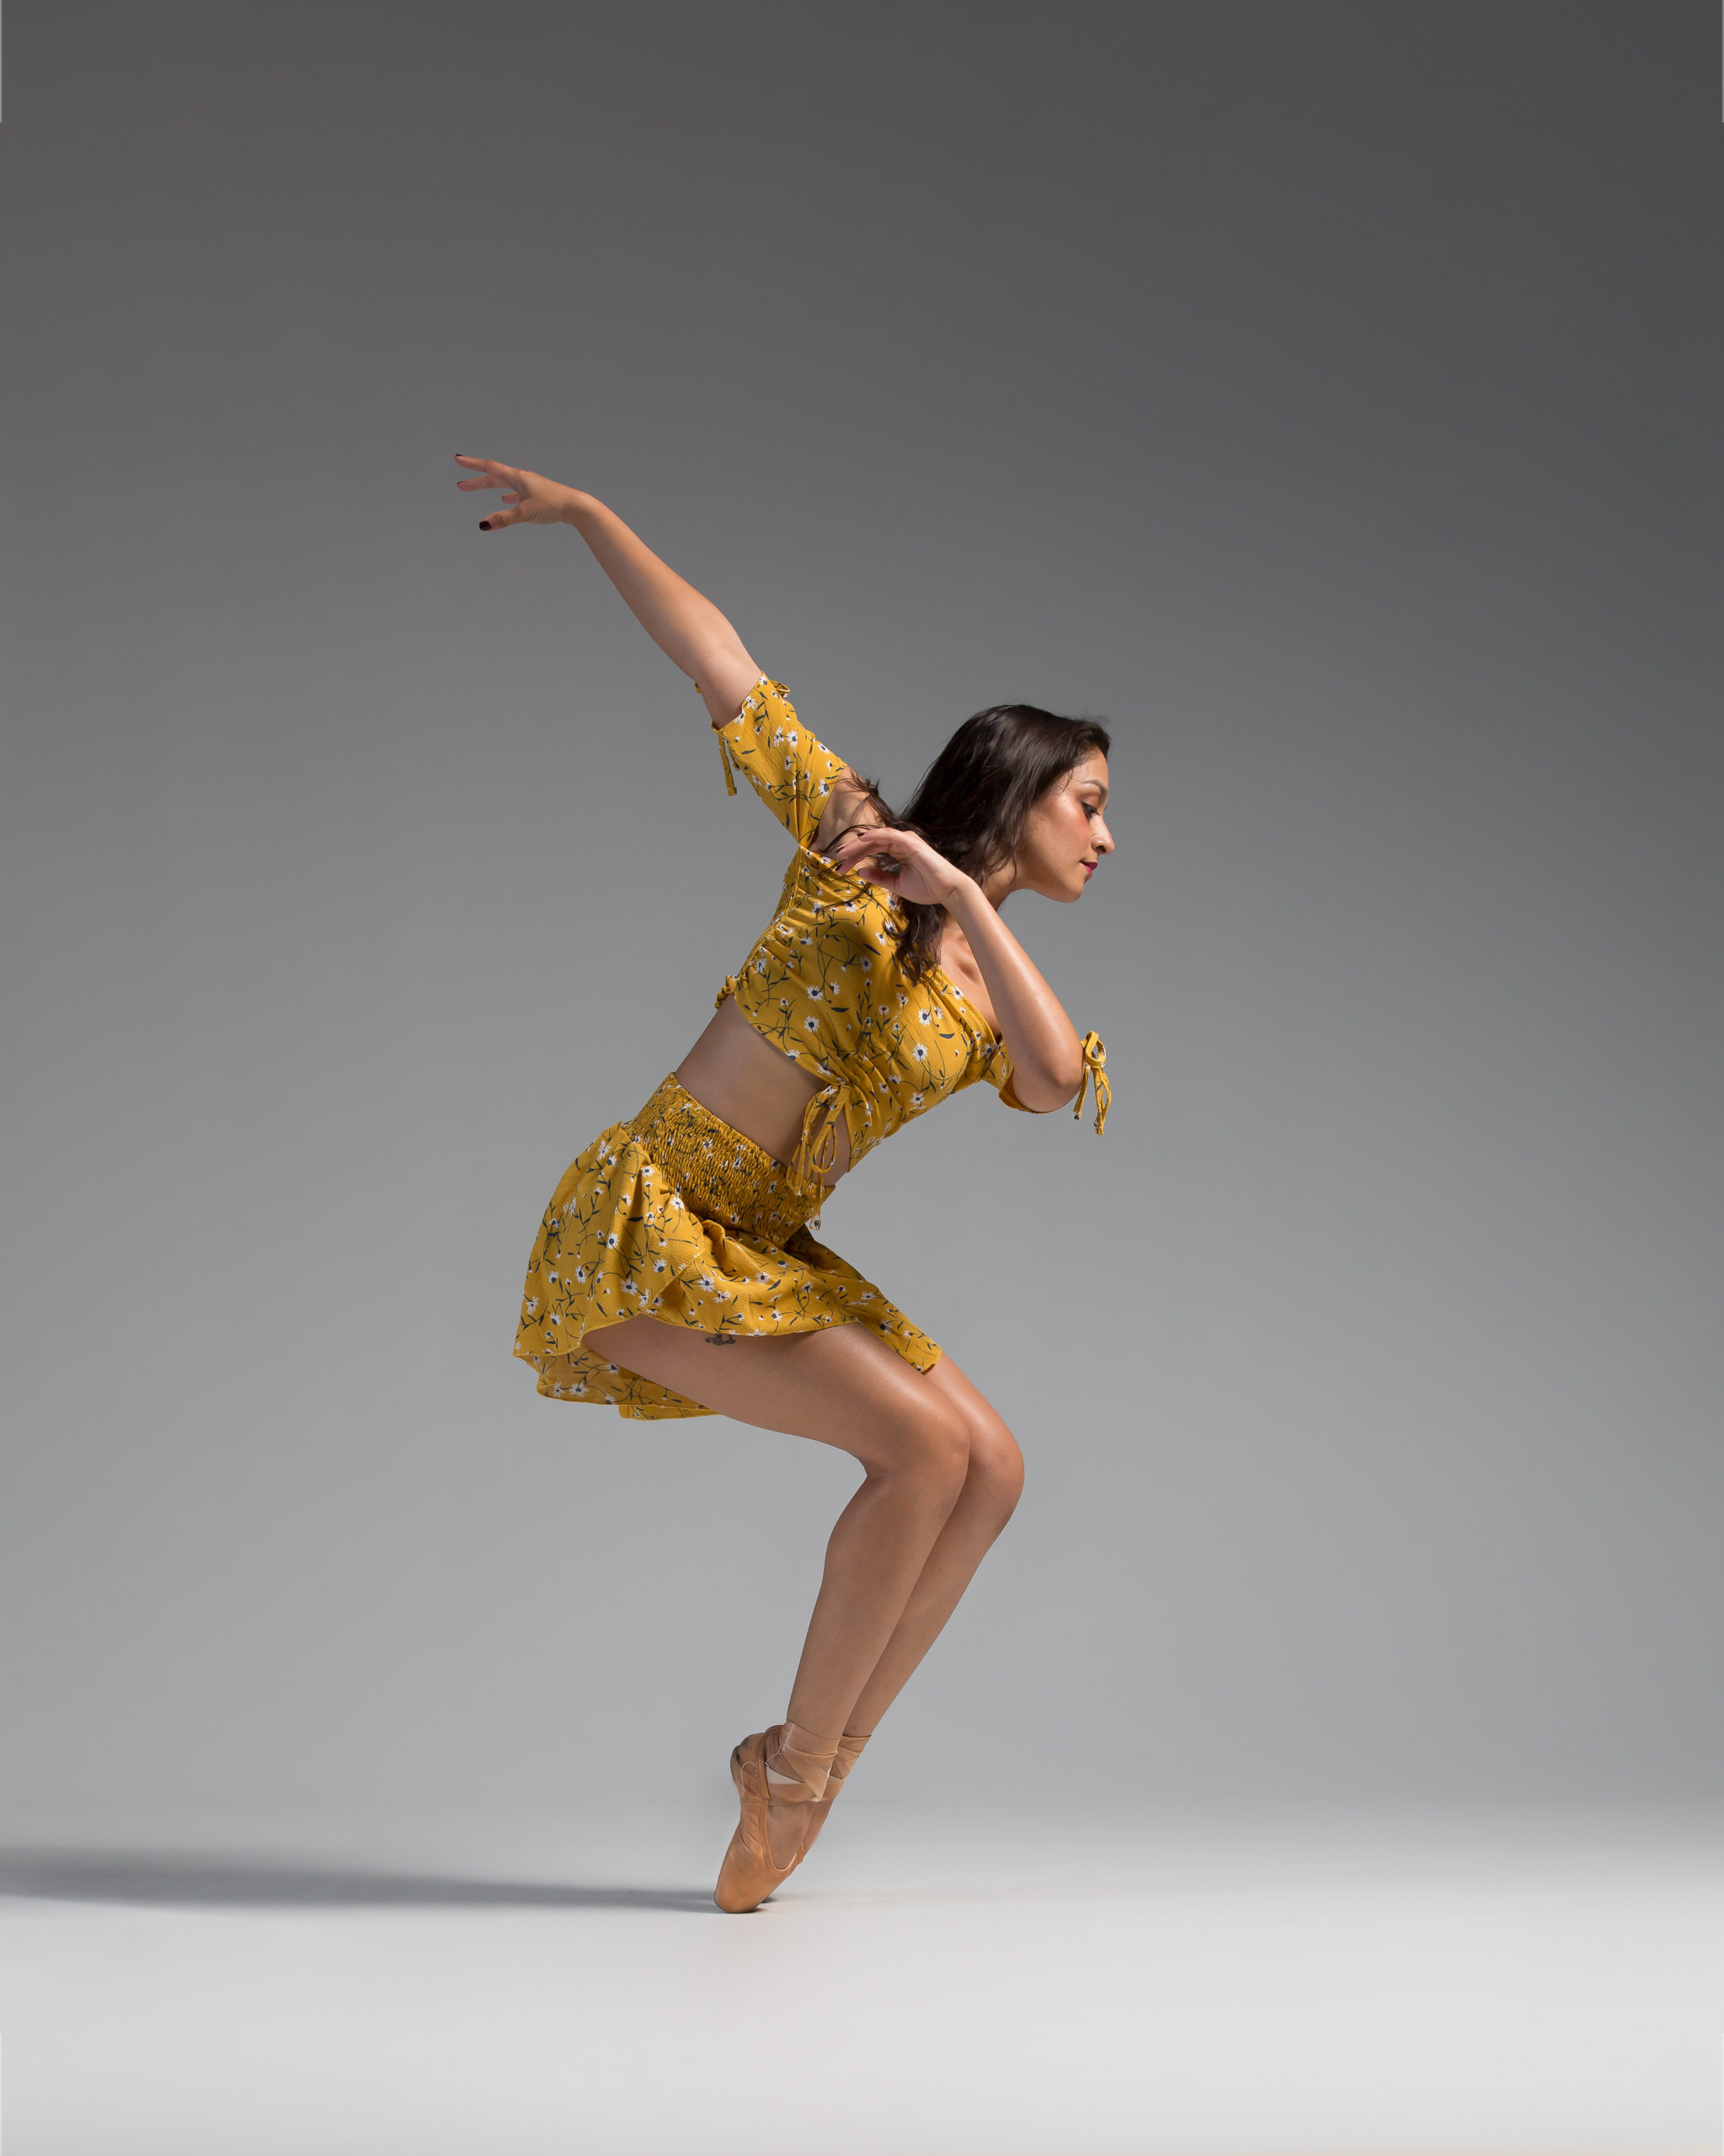 A woman in yellow is dancing on the floor